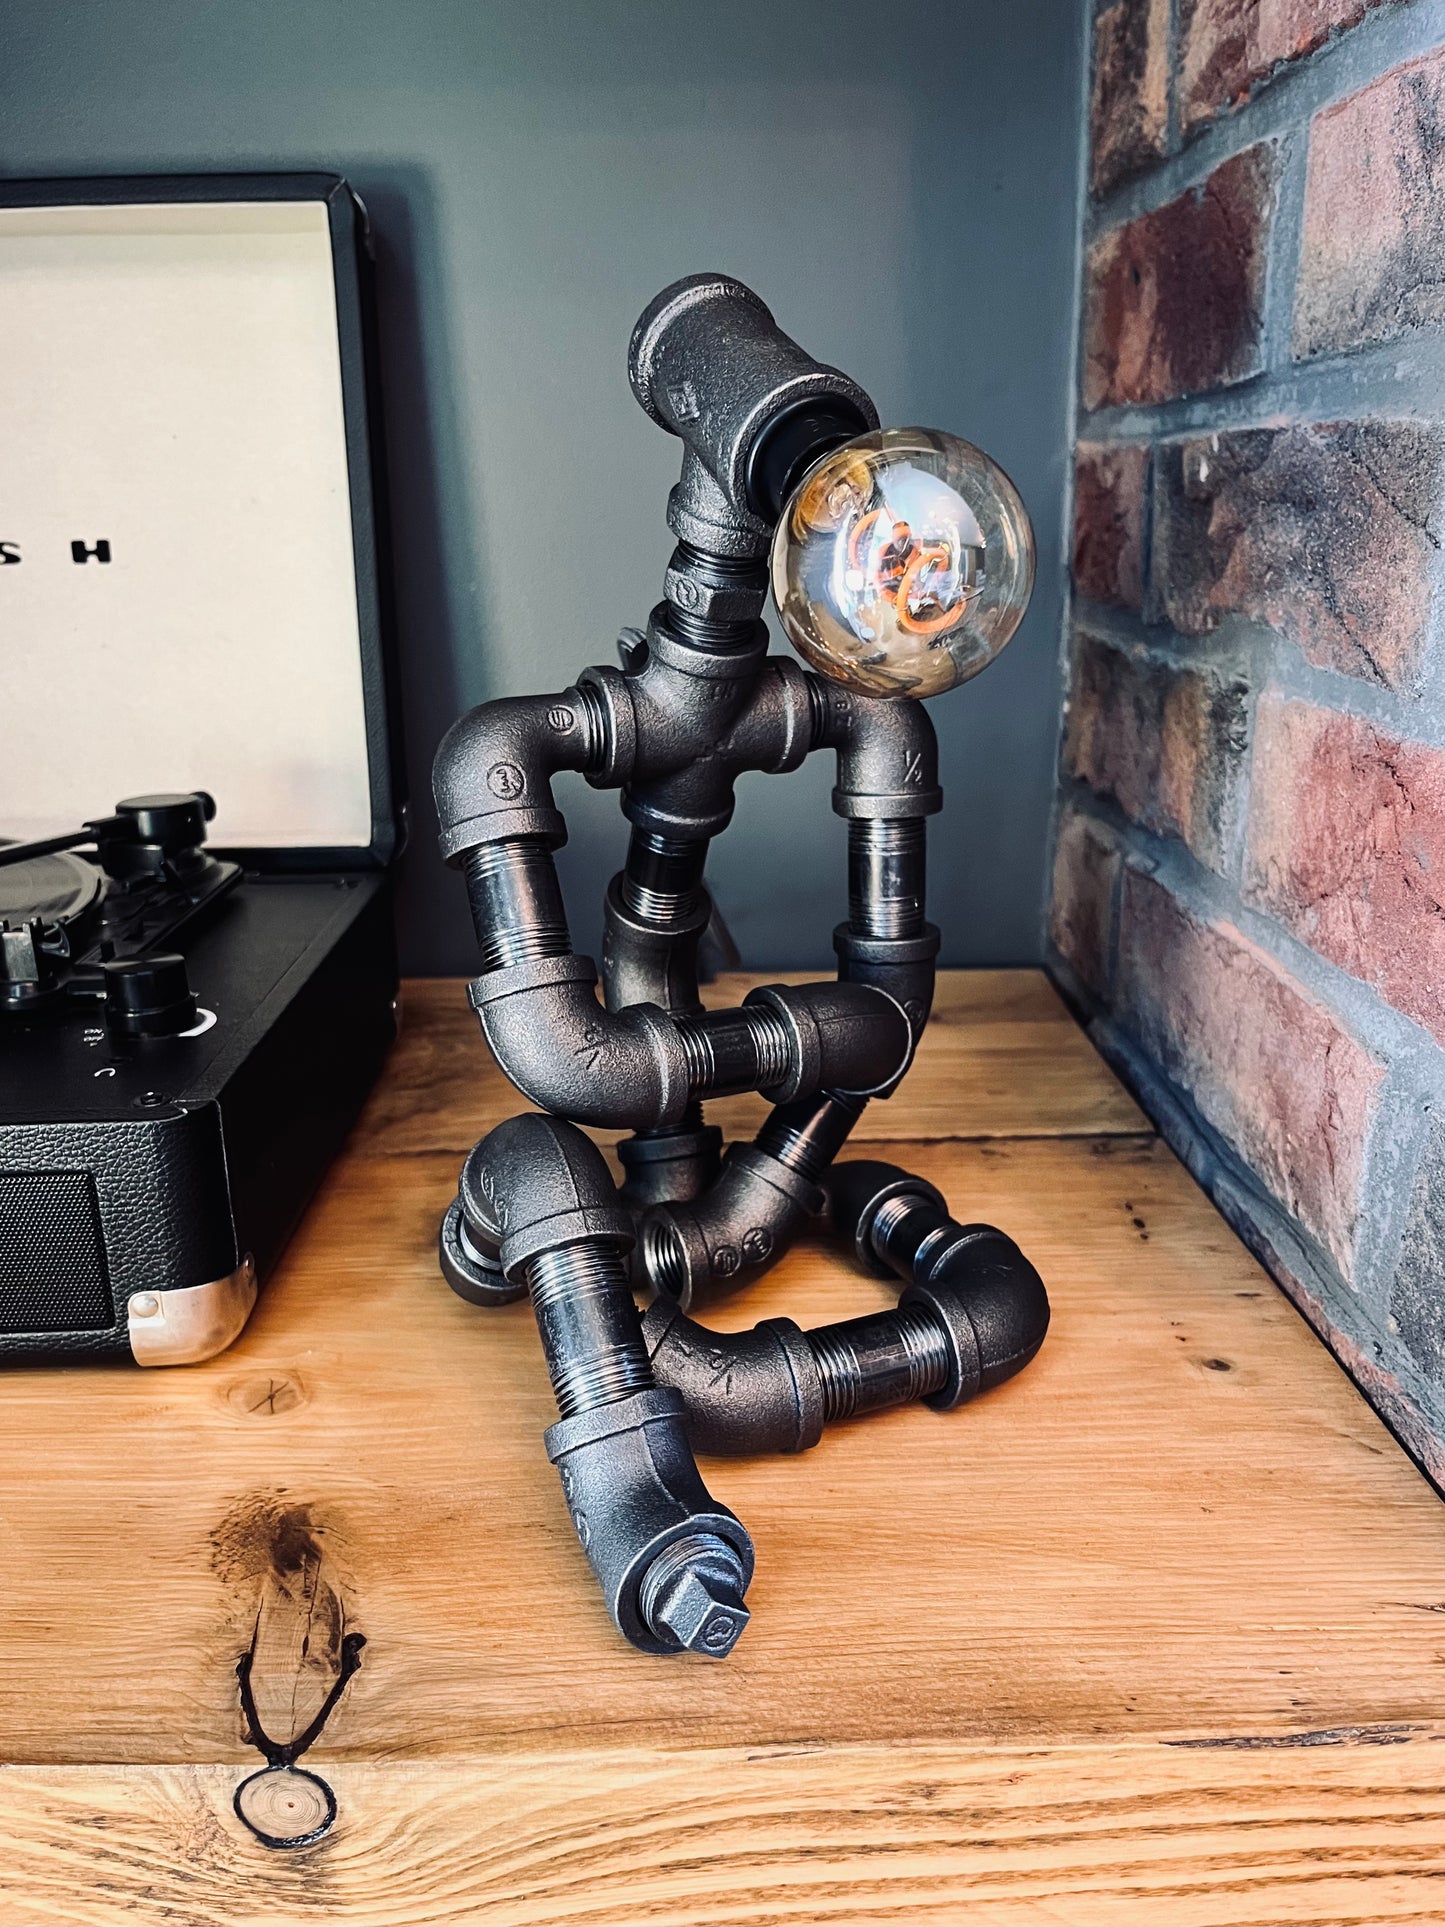 The Thinking Man Industrial Iron Pipe Person Robot Lamp & Vintage Bulb